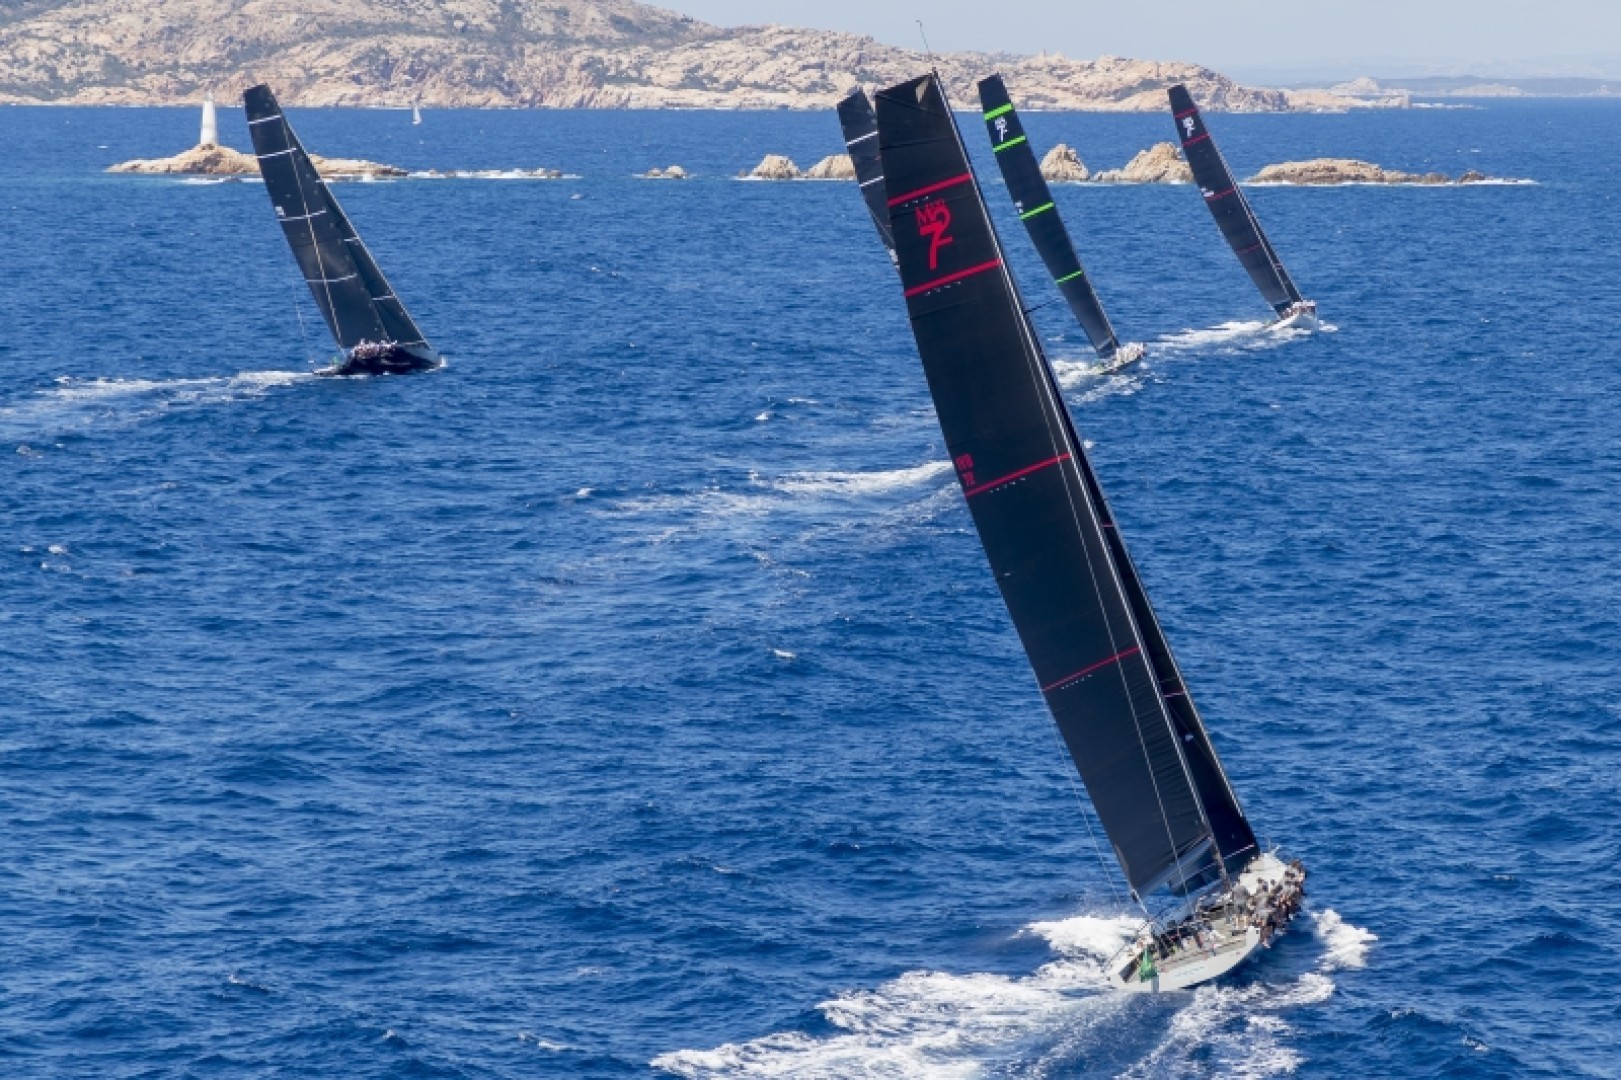 The Maxi 72 fleet racing in a past edition of the Maxi Yacht Rolex Cup. Photo credit: Rolex/Studio Borlenghi